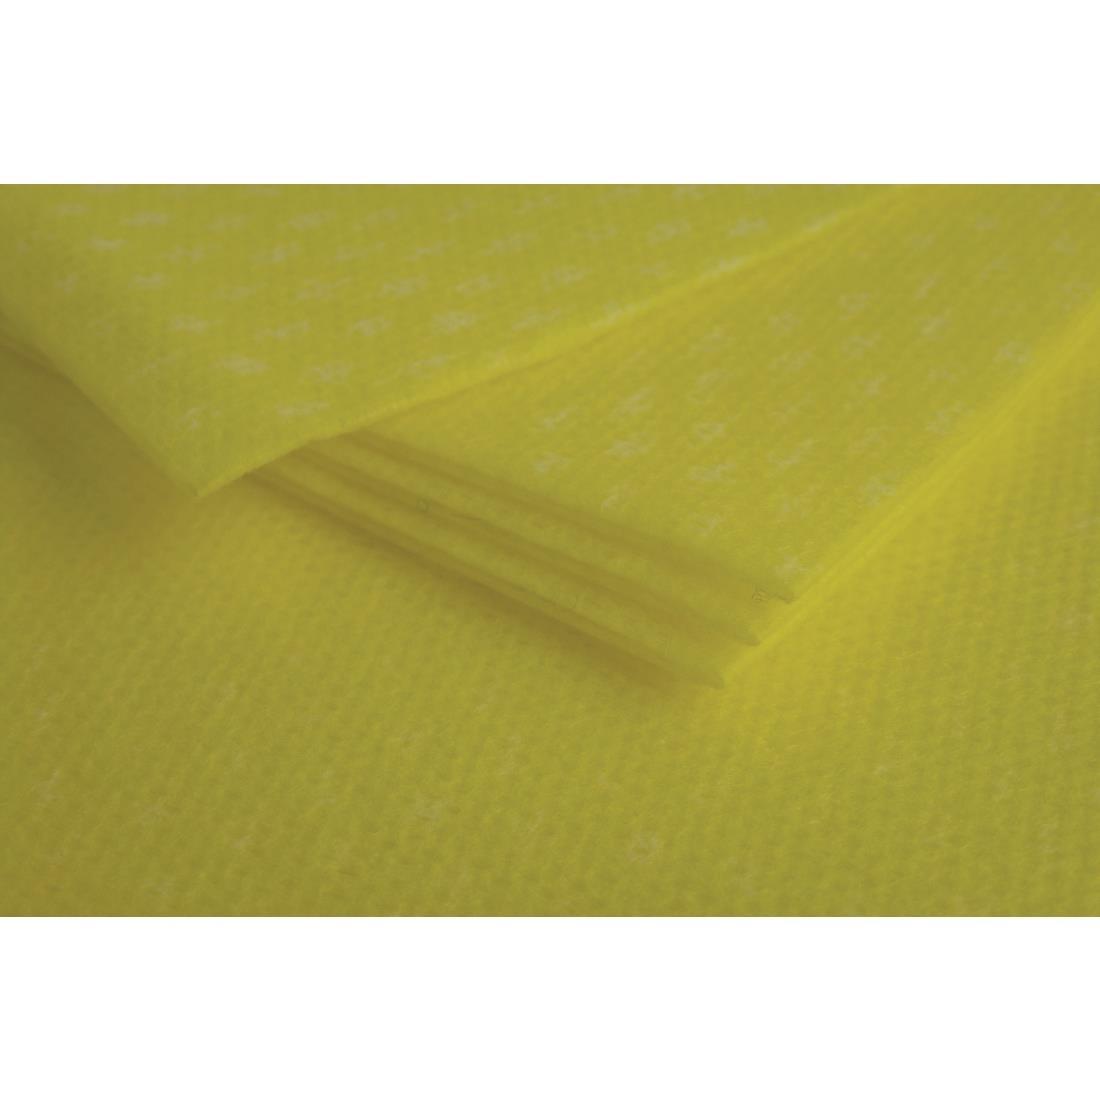 All-Purpose Non-Woven Cleaning Cloths Yellow (Pack of 500) - FP683  - 2